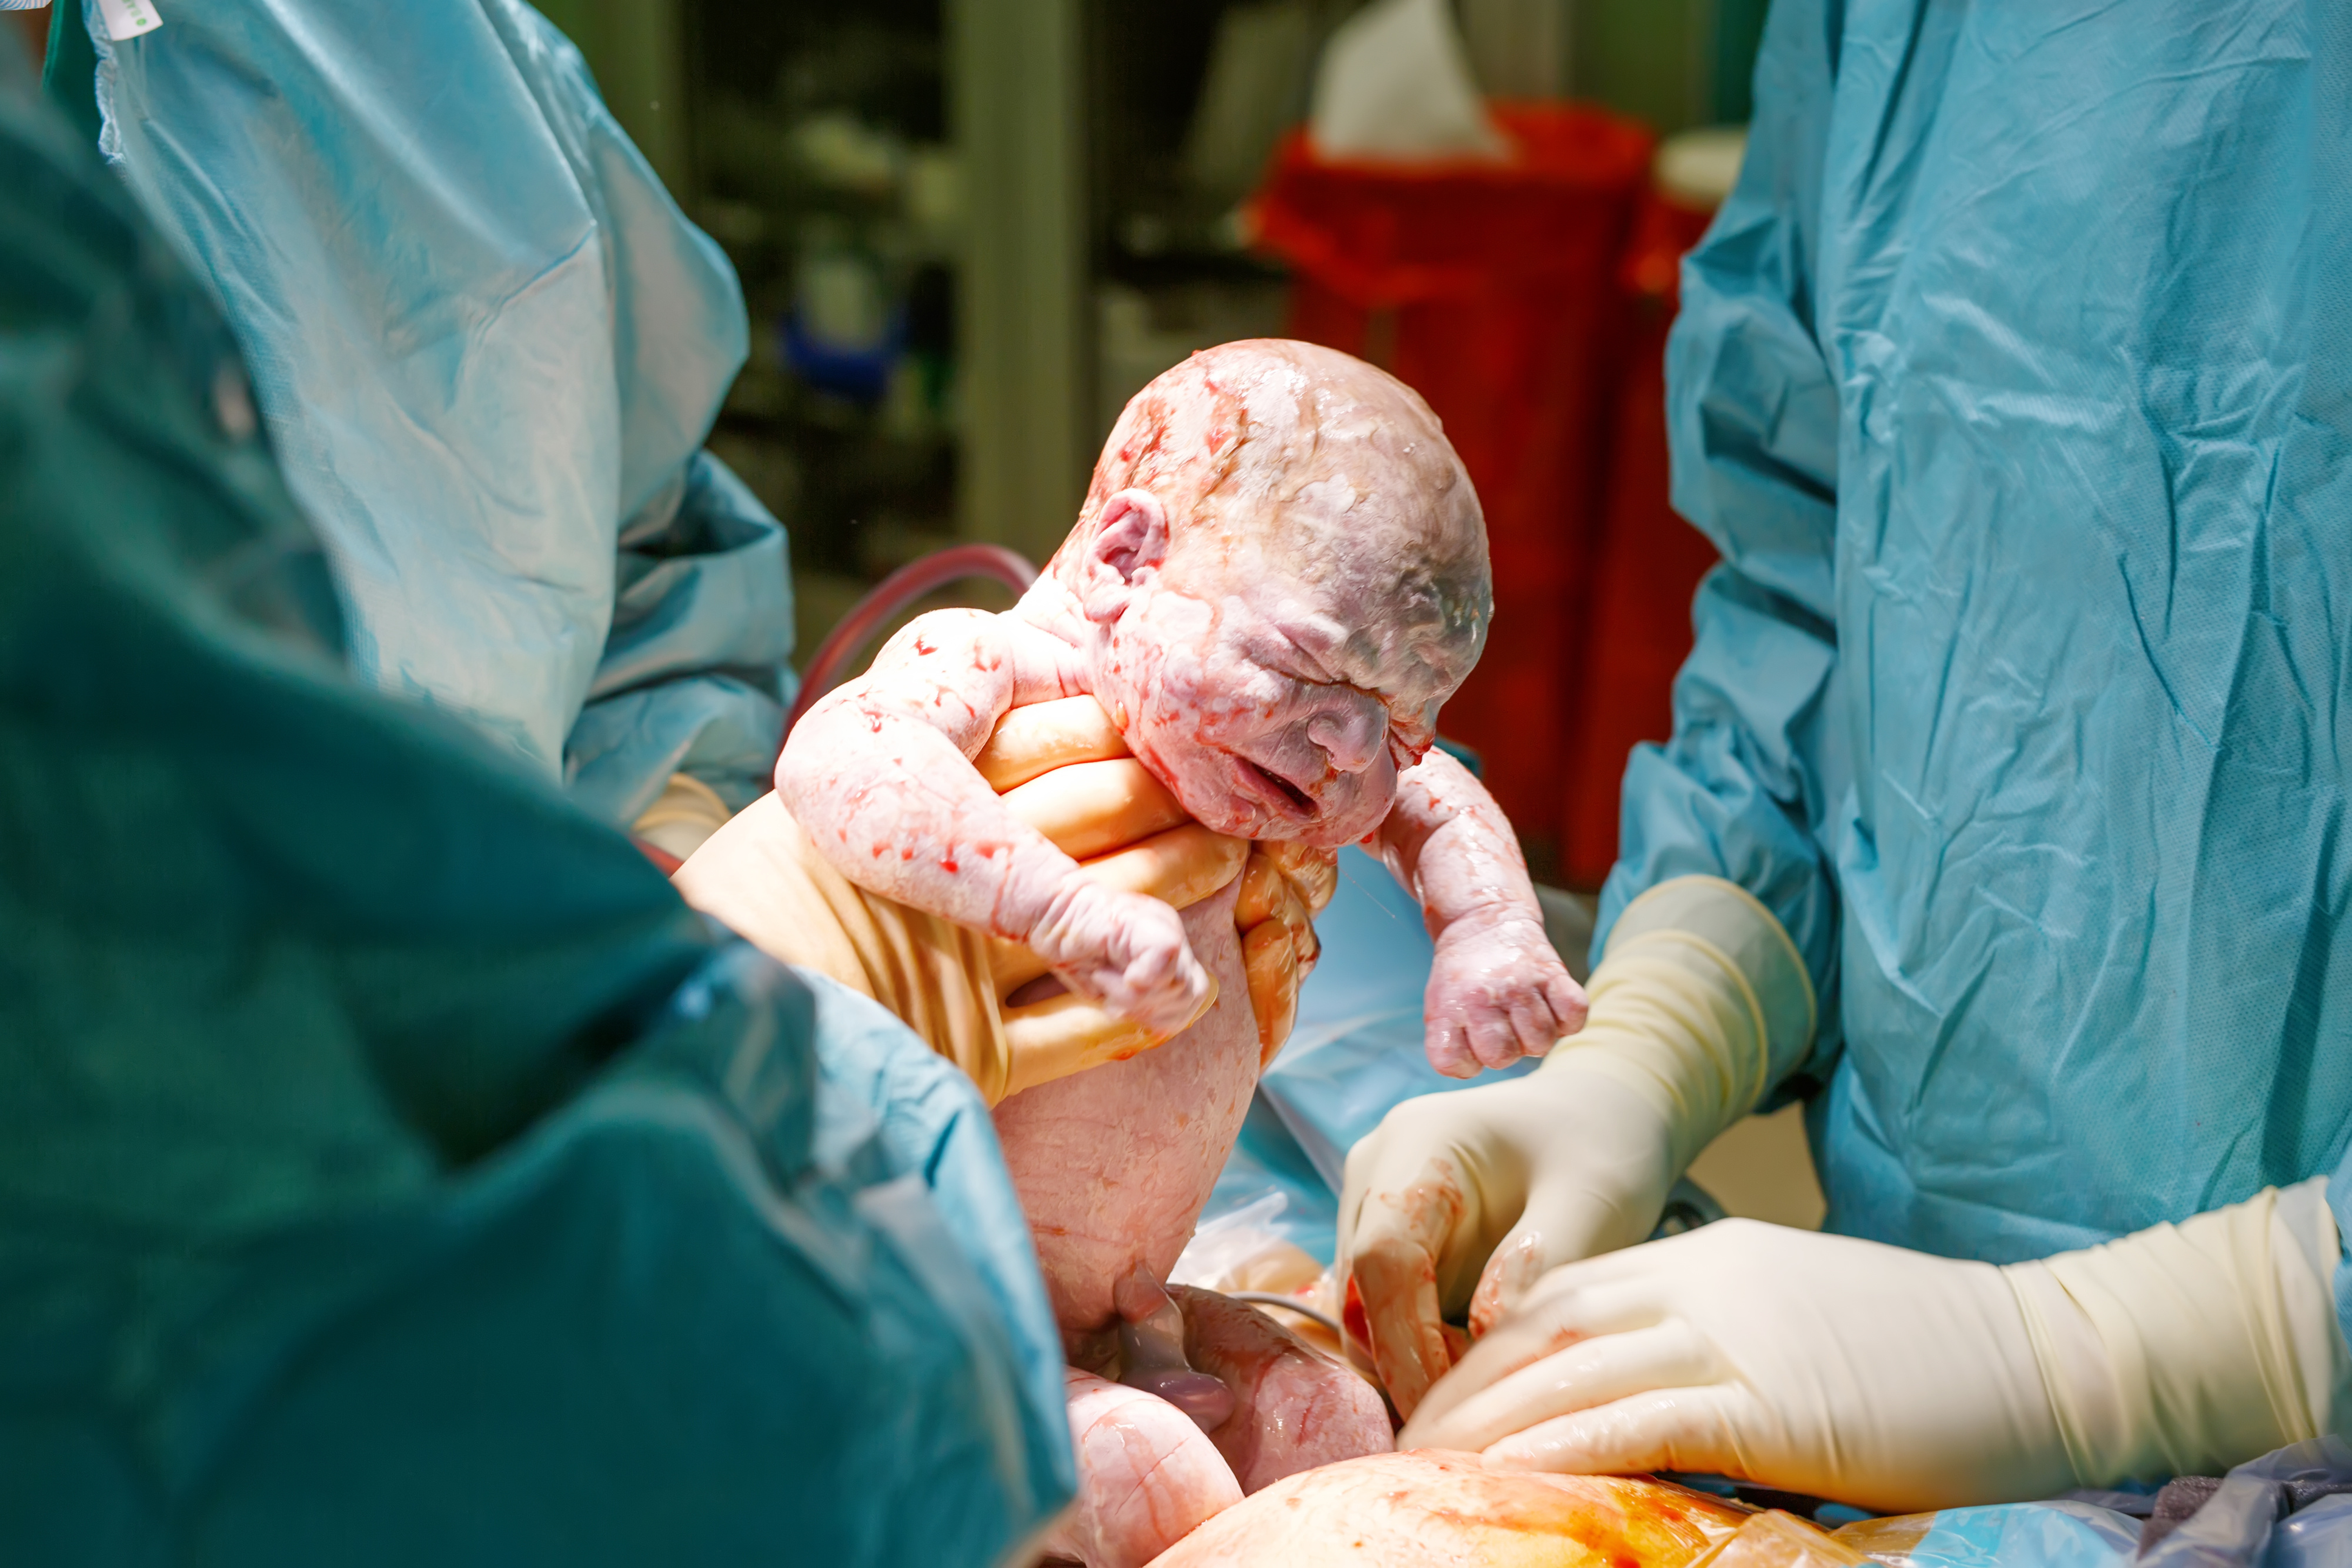  Baby  being born via Caesarean Section coming out Newborn 